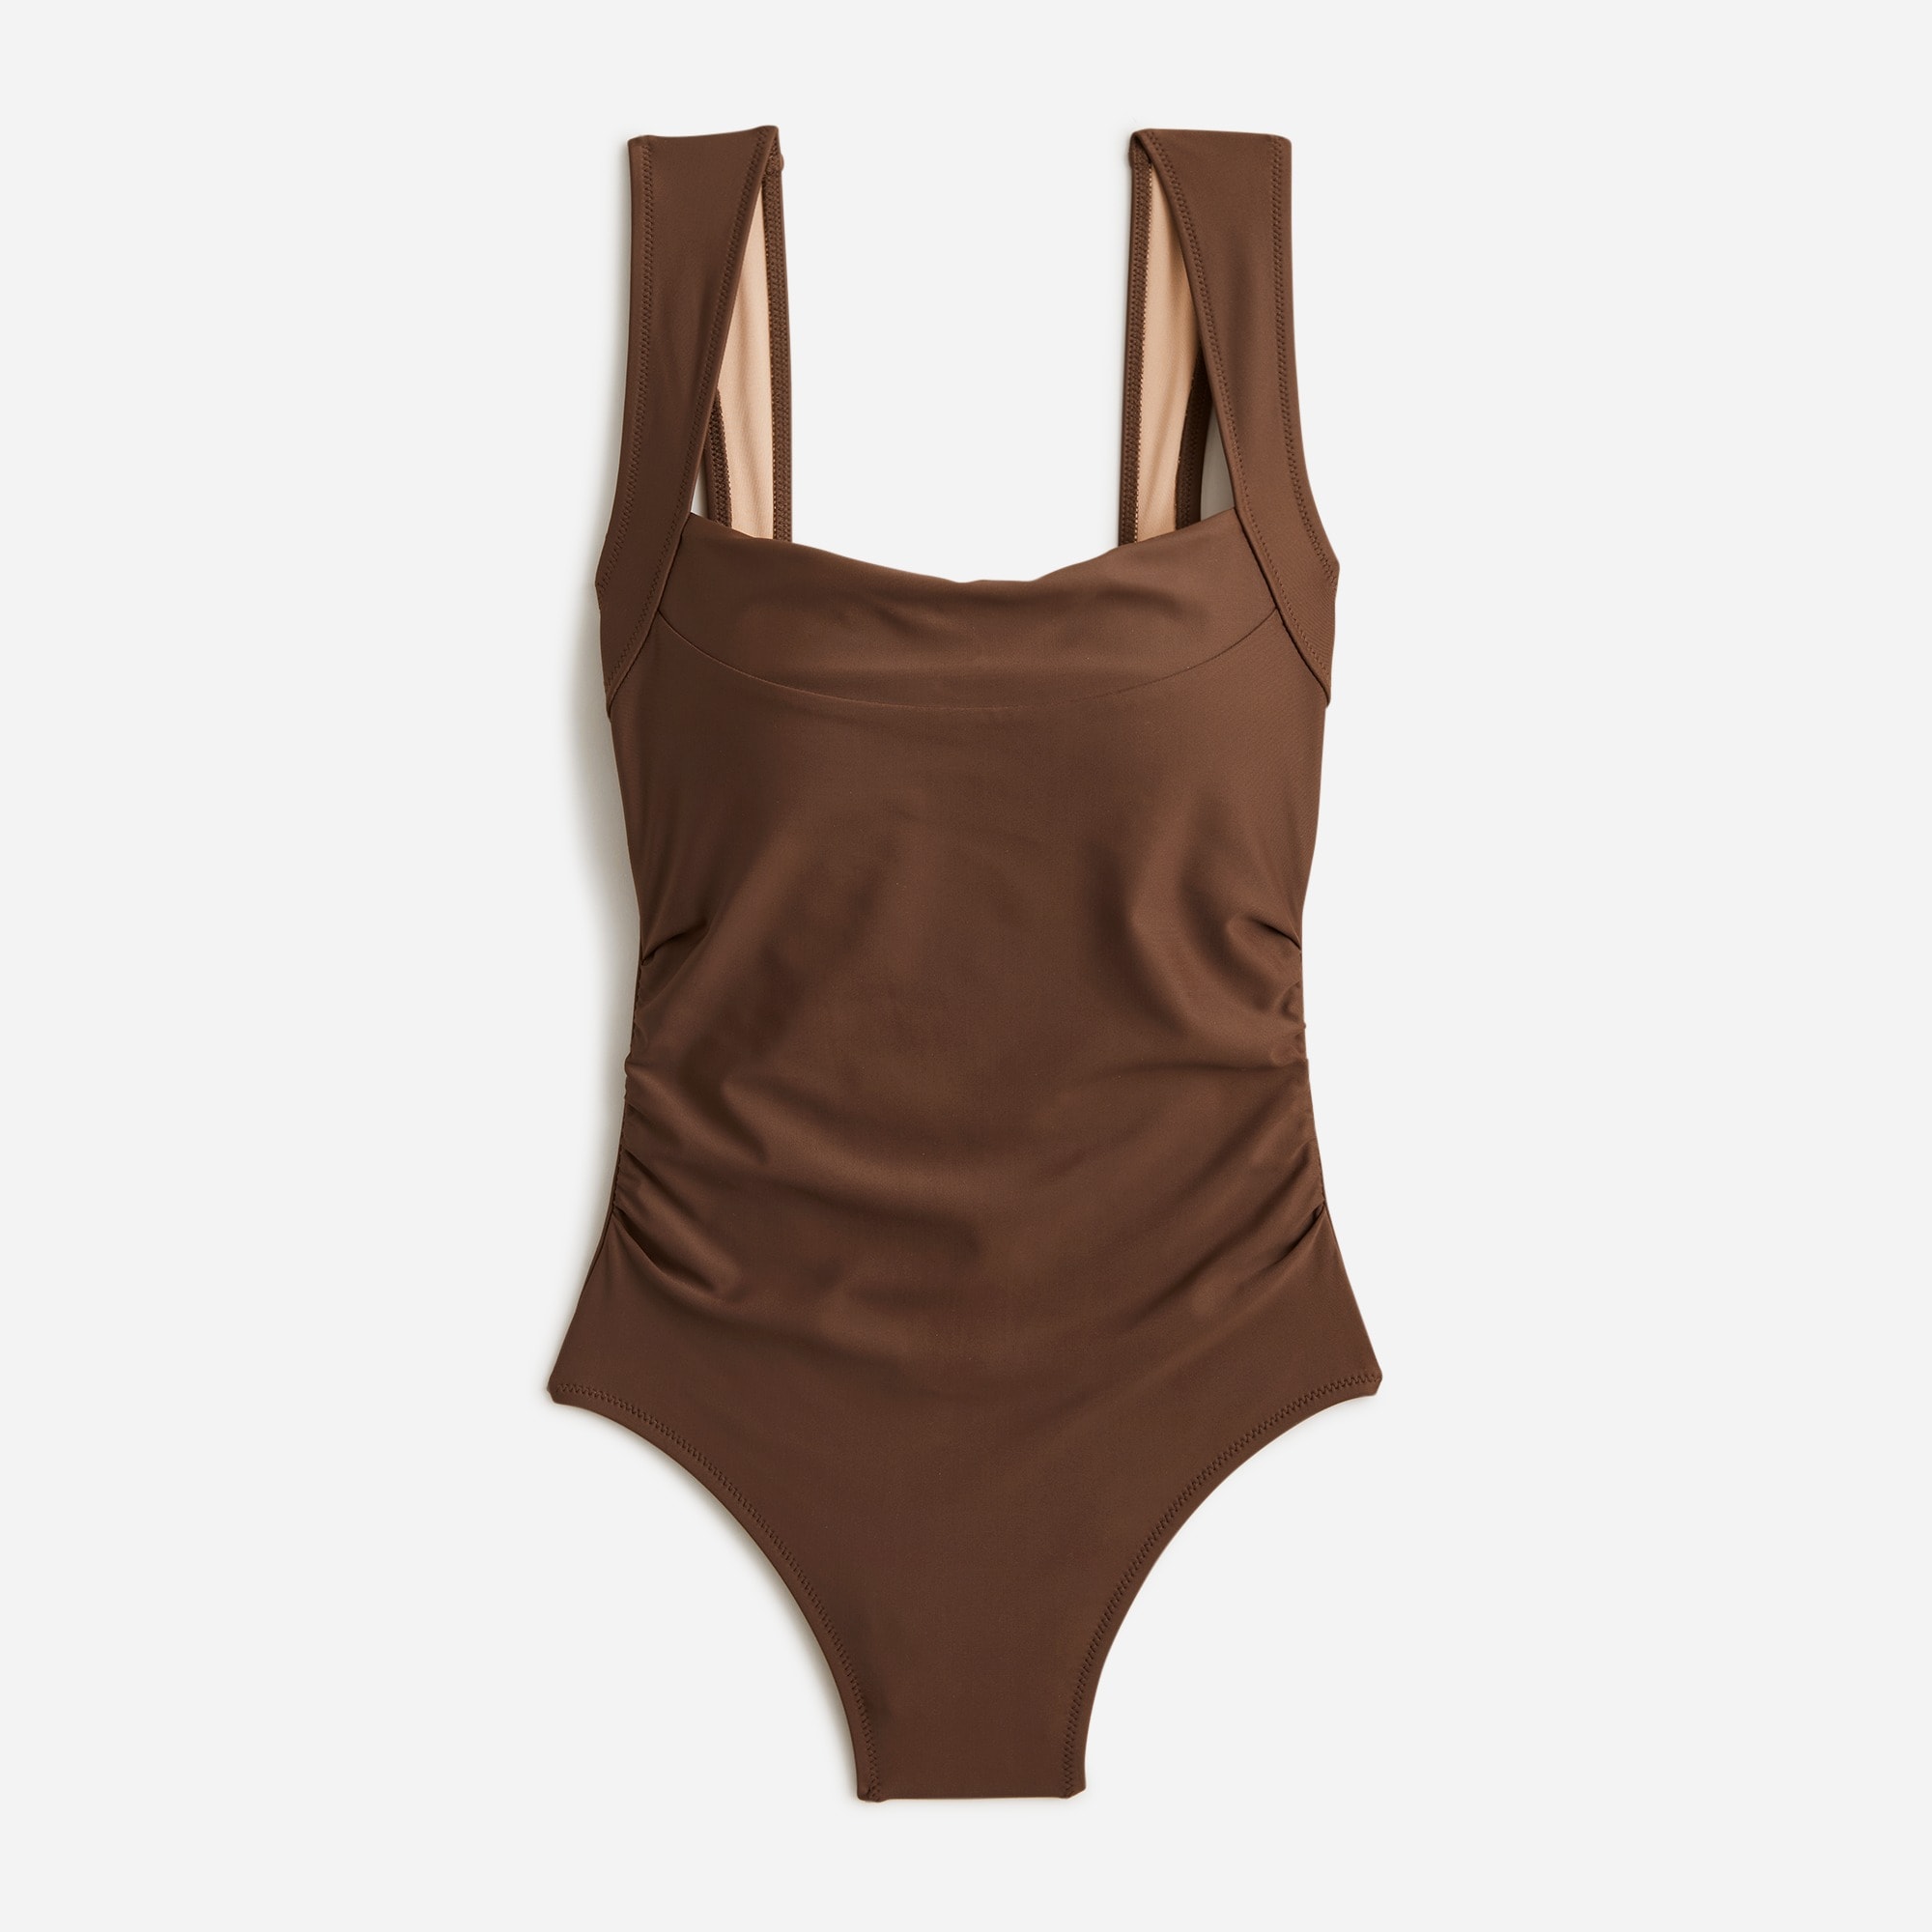  Ruched squareneck one-piece swimsuit